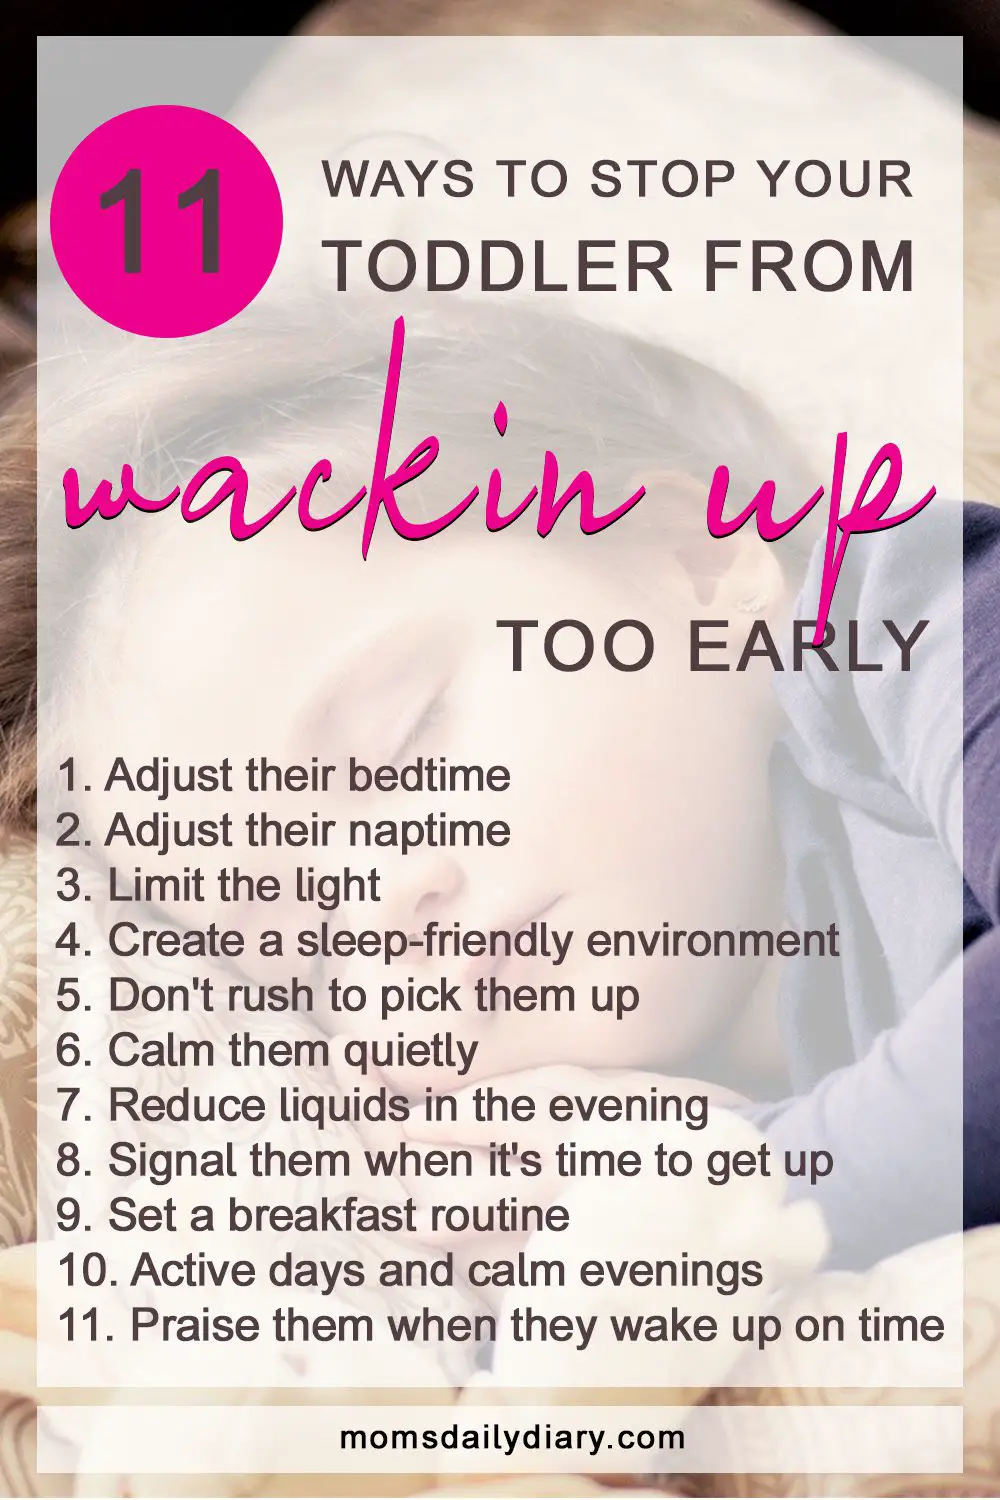 11 ways to stop your toddler from waking up too early